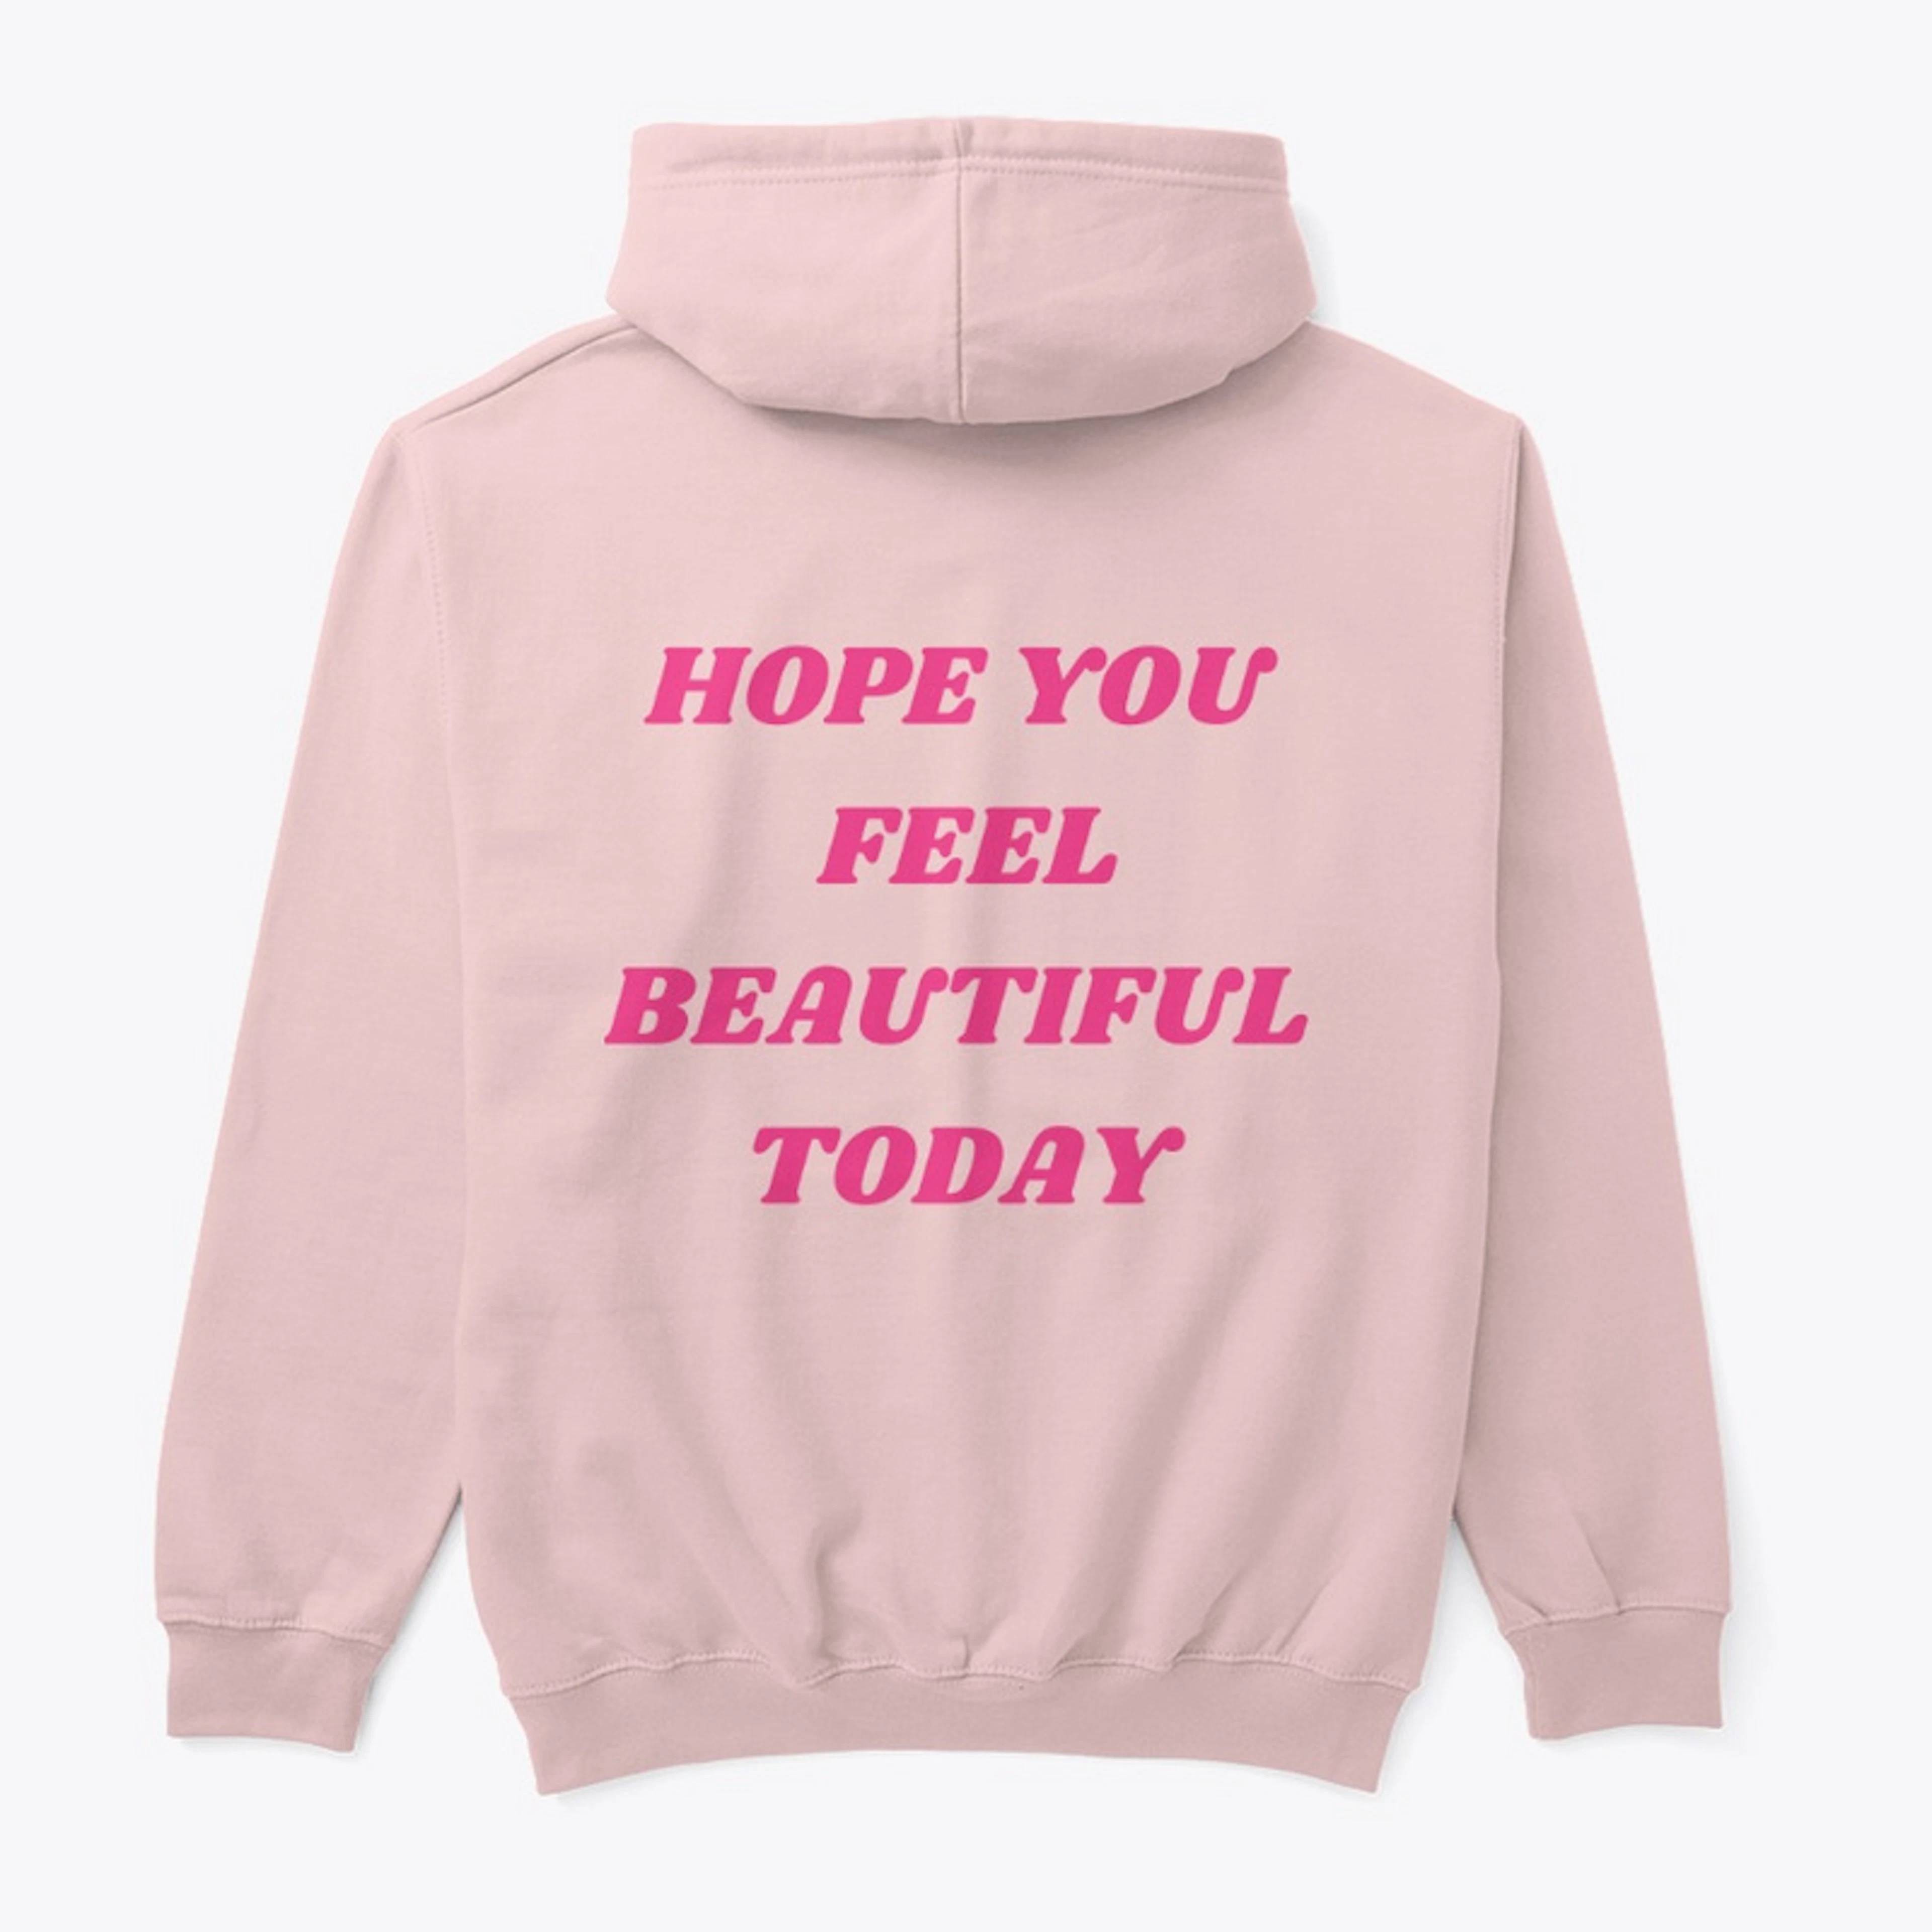 HOPE YOU FEEL BEAUTIFUL TODAY- HOT PINK